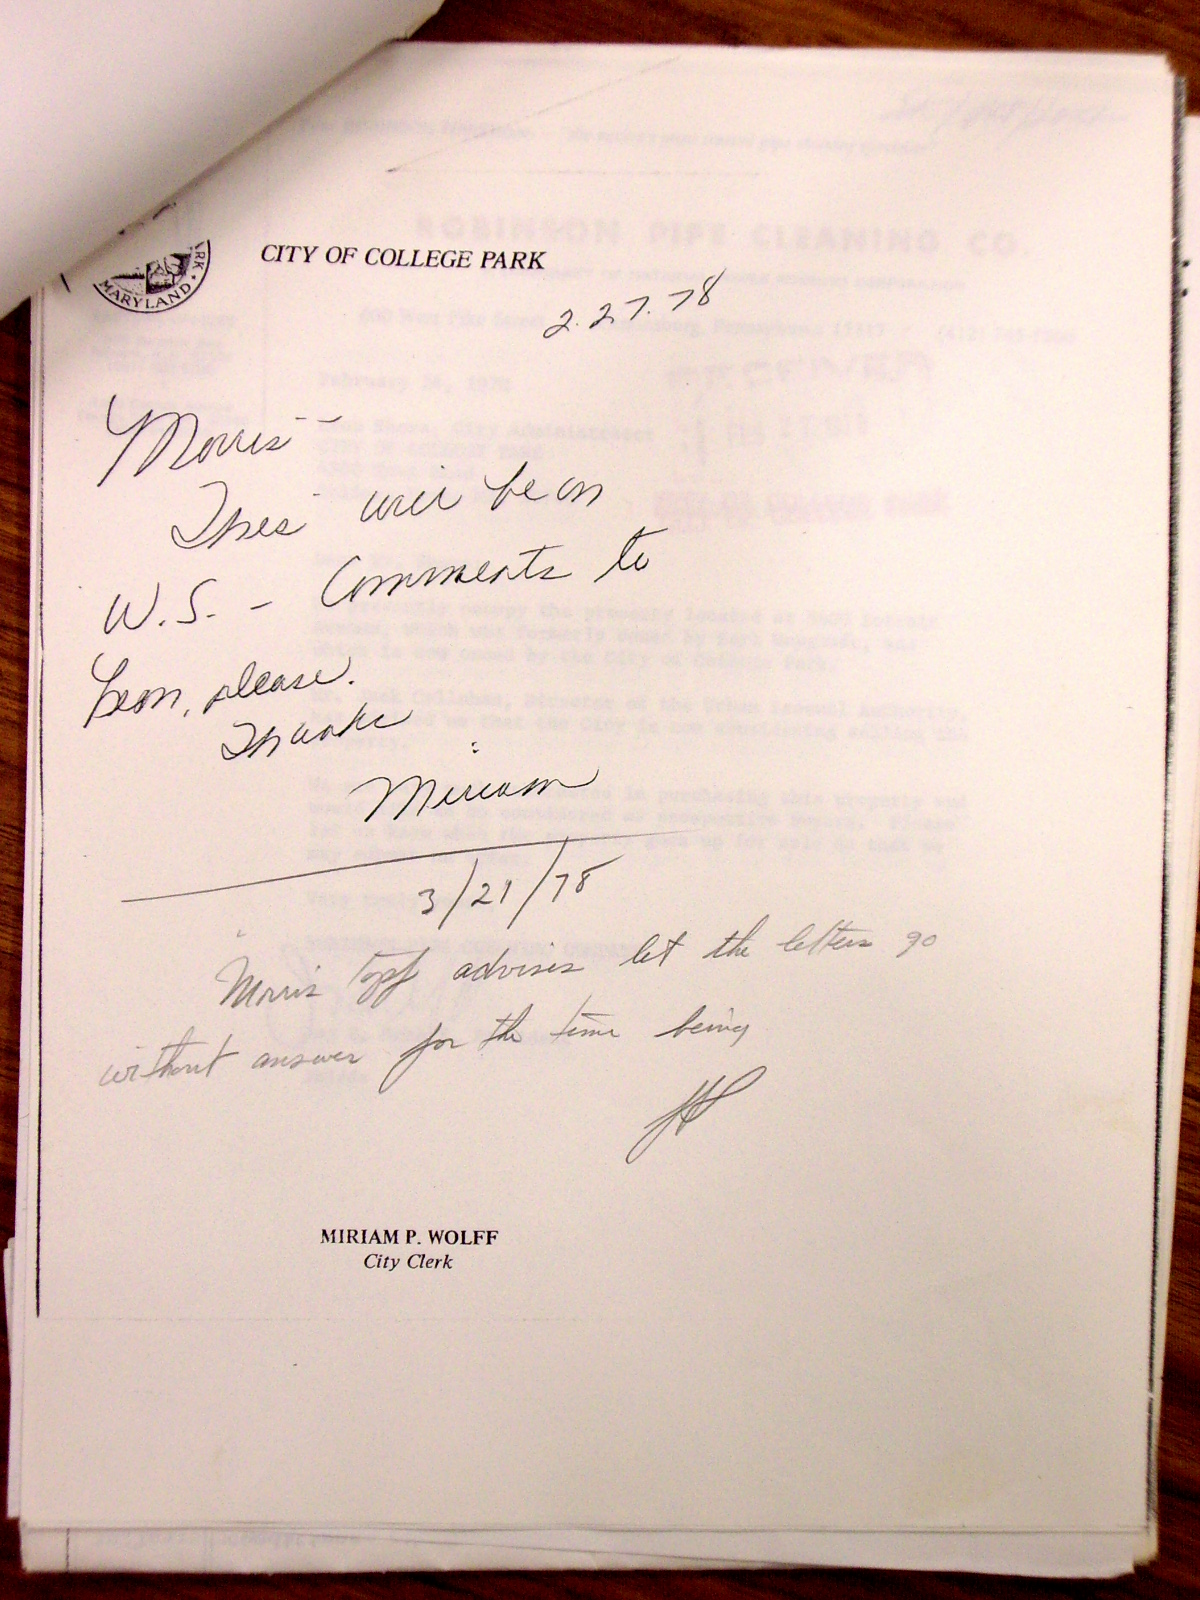 Hand written note from Miriam Wolff, with reply comment from Morris Topf to ignore Callahan letter; enclosing a letter to Mayor Reeves from Robinson Pipe Cleaning